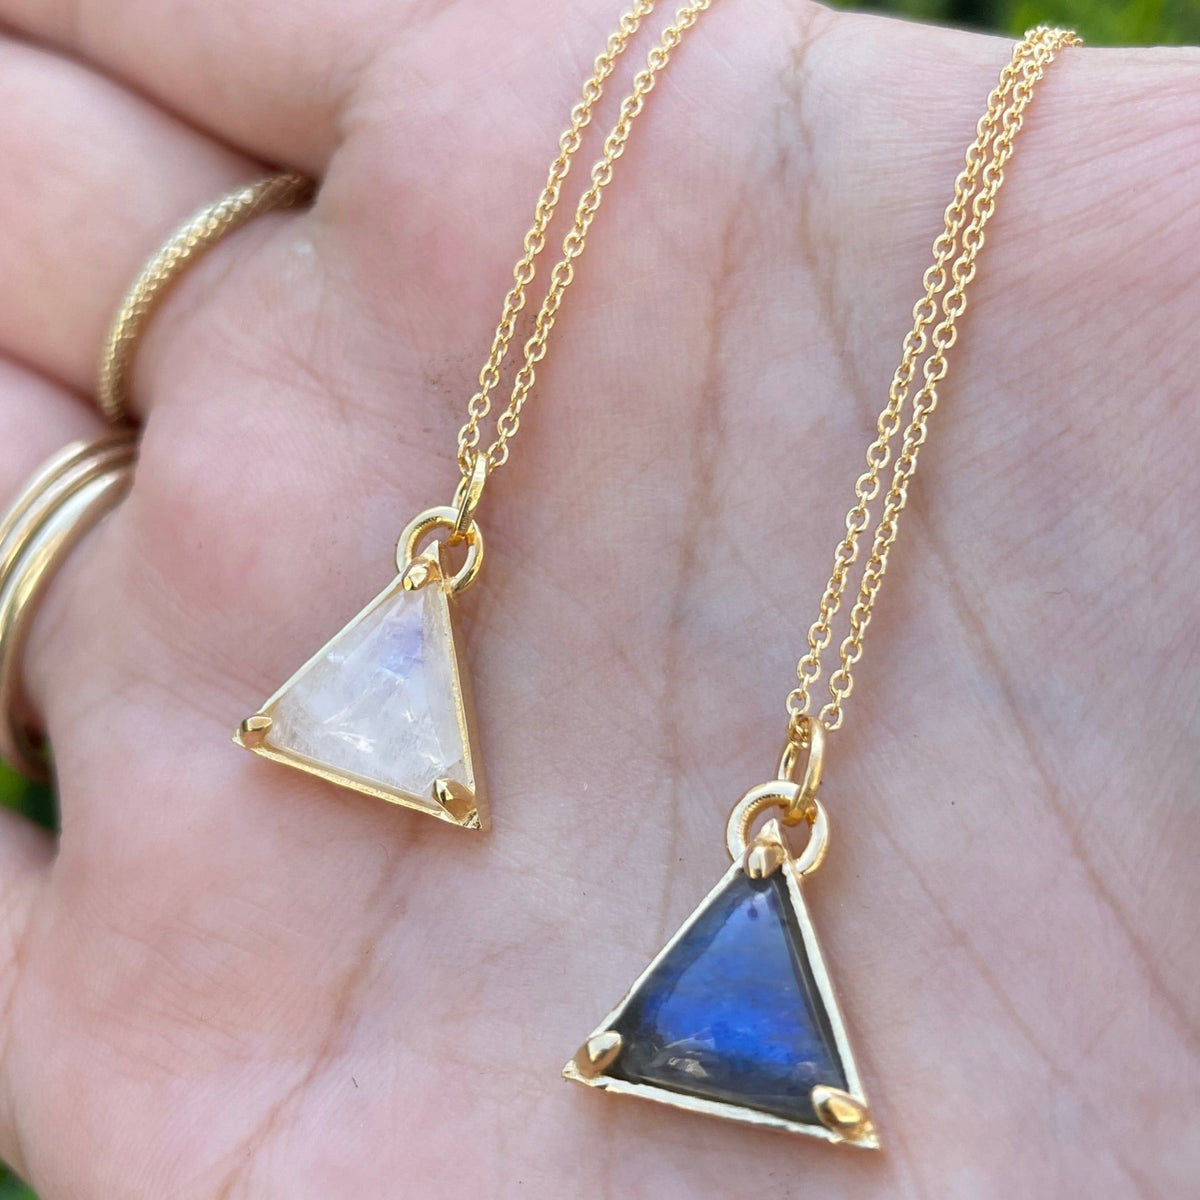 Labradorite Triangle Necklace - sterling silver or vermeil | Stone Love Collection necklace Amanda K Lockrow